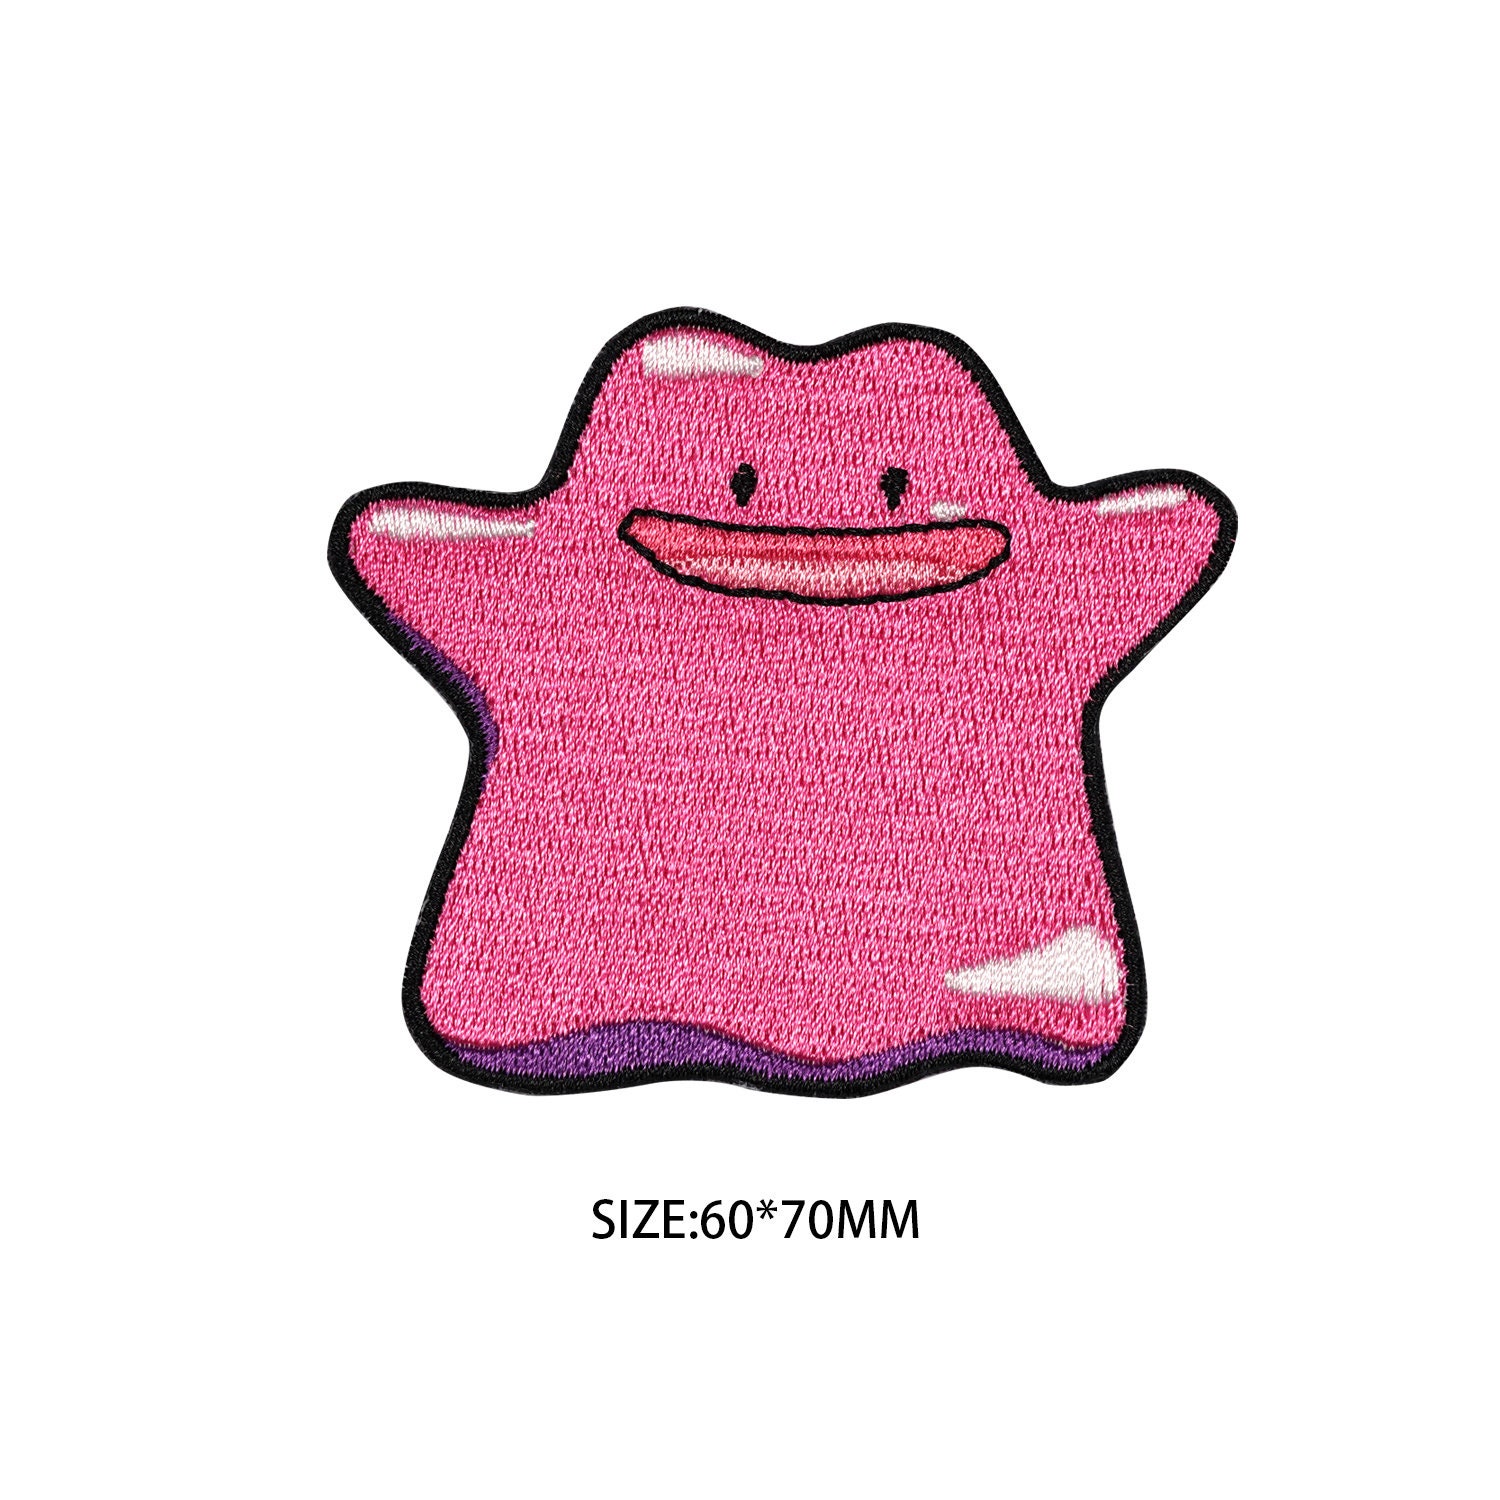 Pokemon Mini Embroidered Sew Iron On Patch Badge Ditto